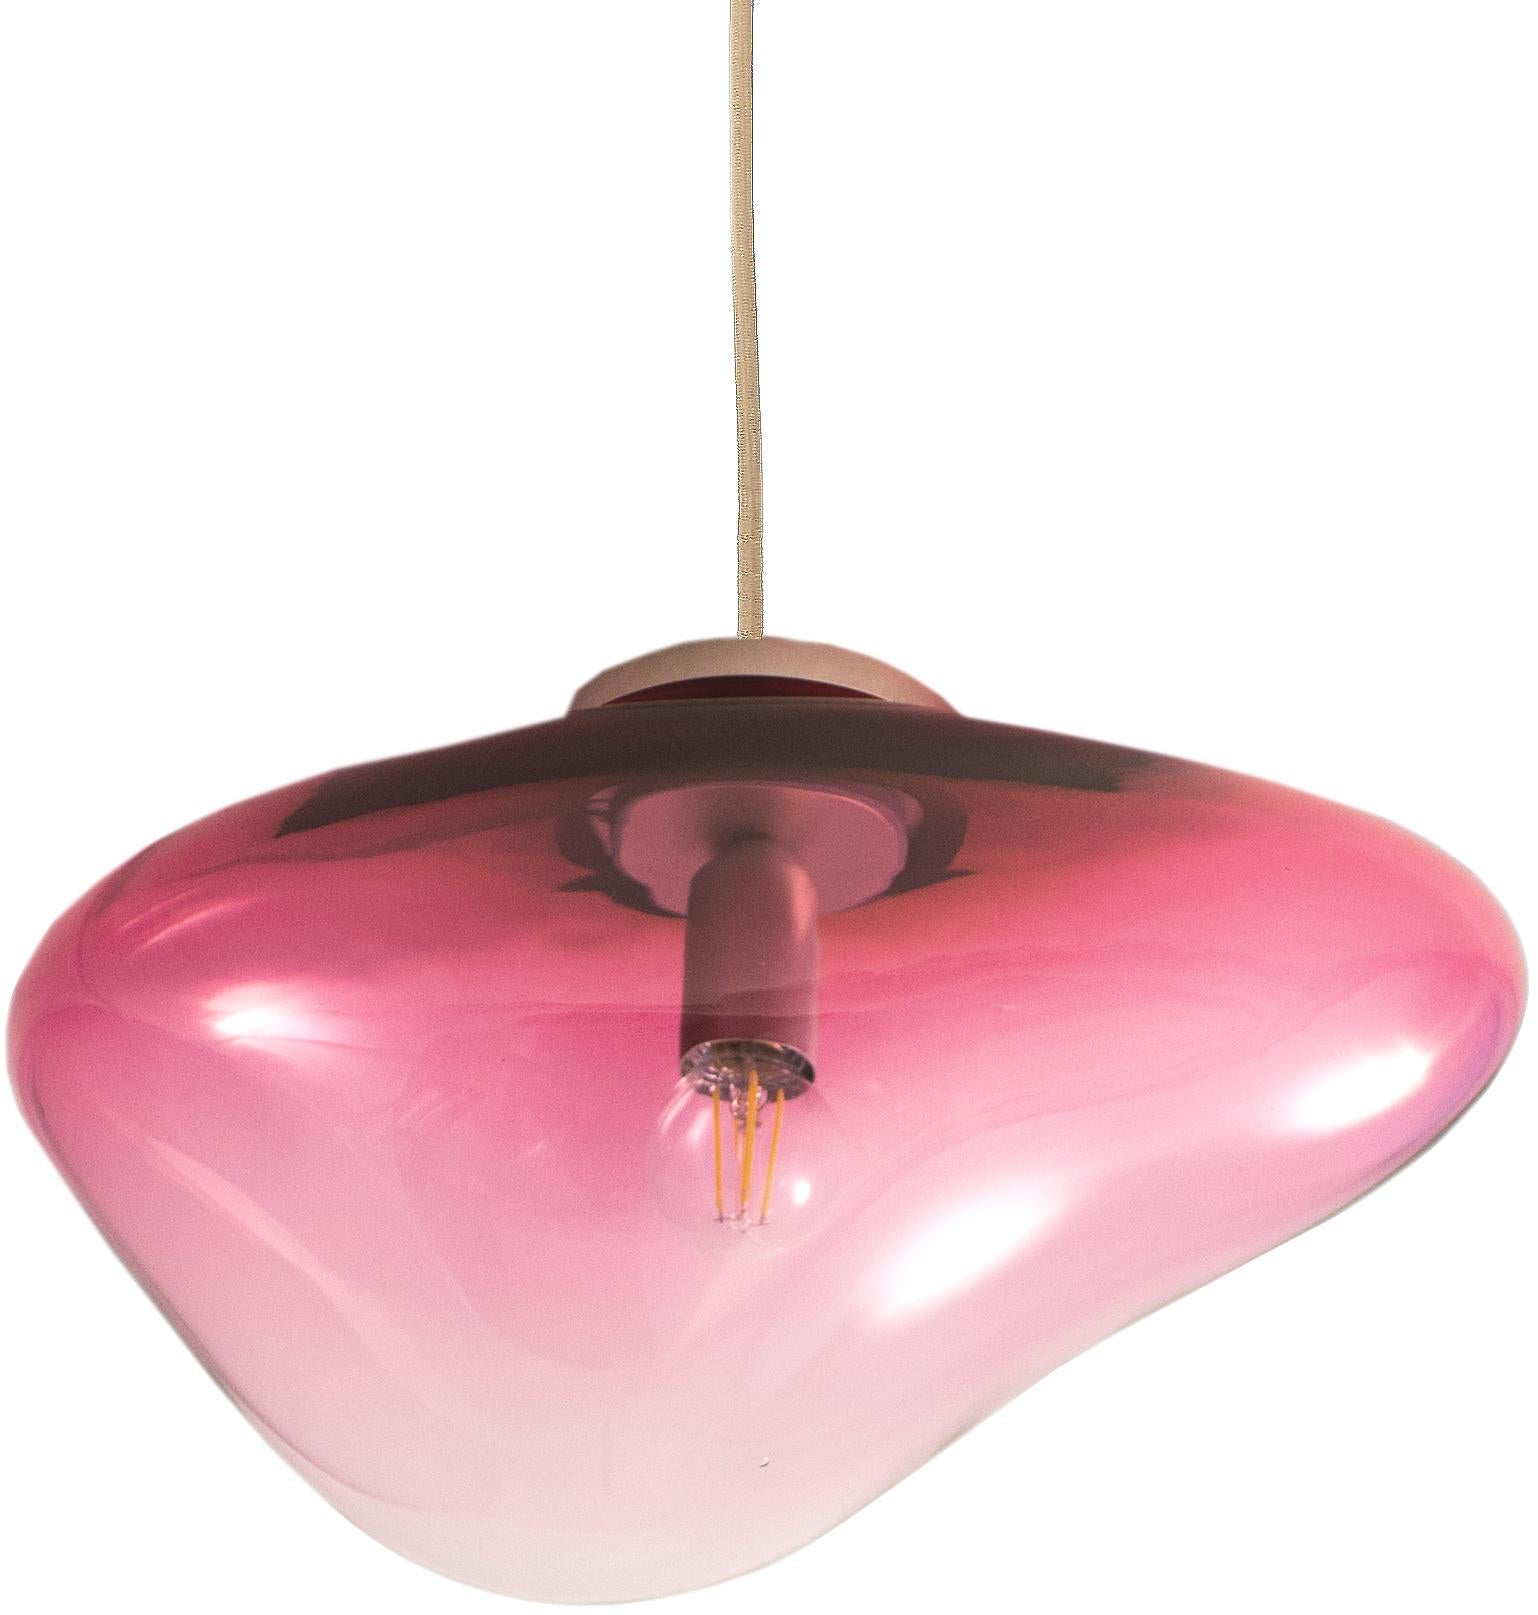 Planetoide Erosi Brilliant Ruby pendant by ELOA
No UL listed 
Material: glass, steel, silver, LED Bulb
Dimensions: D30 x W30 x H250 cm
Also available in different colours and dimensions.

All our lamps can be wired according to each country. If sold